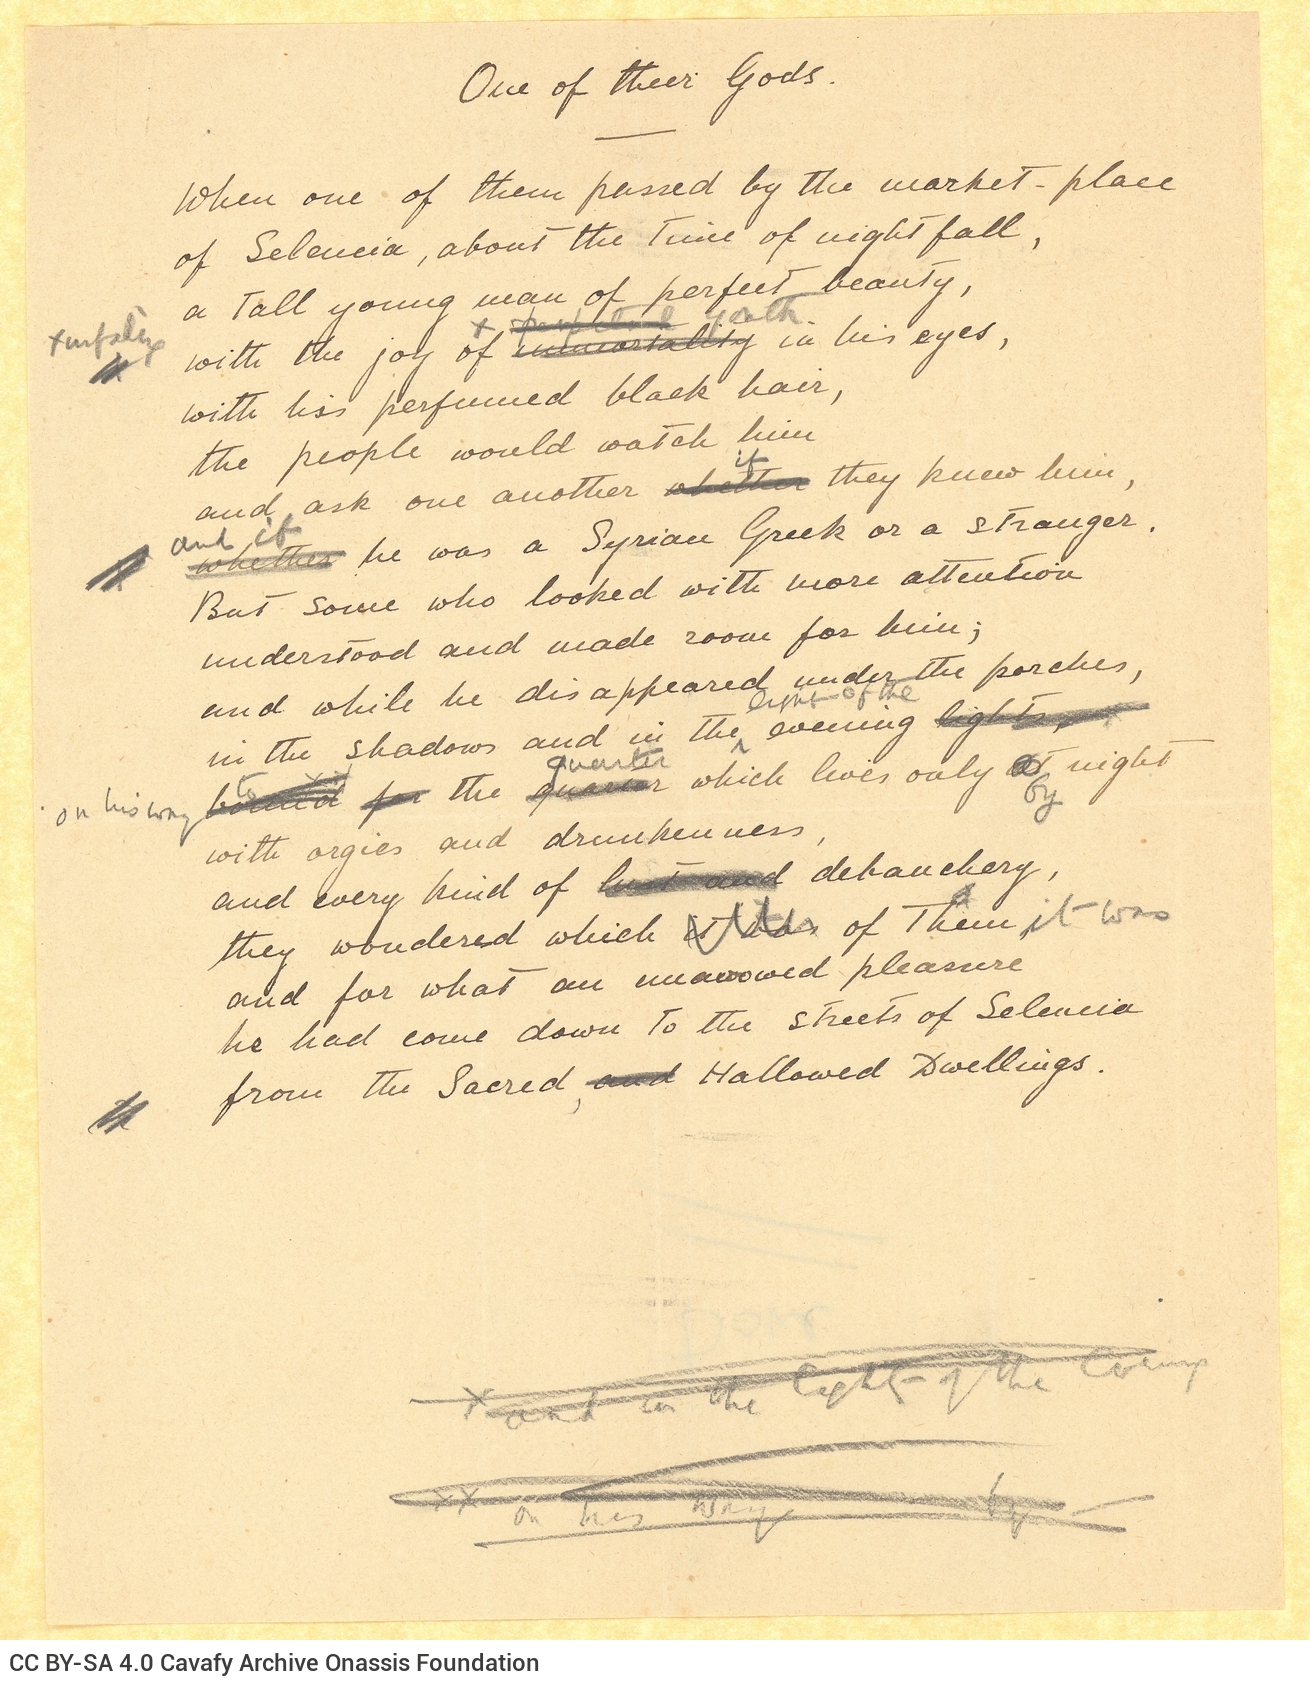 Handwritten English translation of the poem "One of Their Gods" by G. Valassopoulo on one side of a sheet. Handwritten can